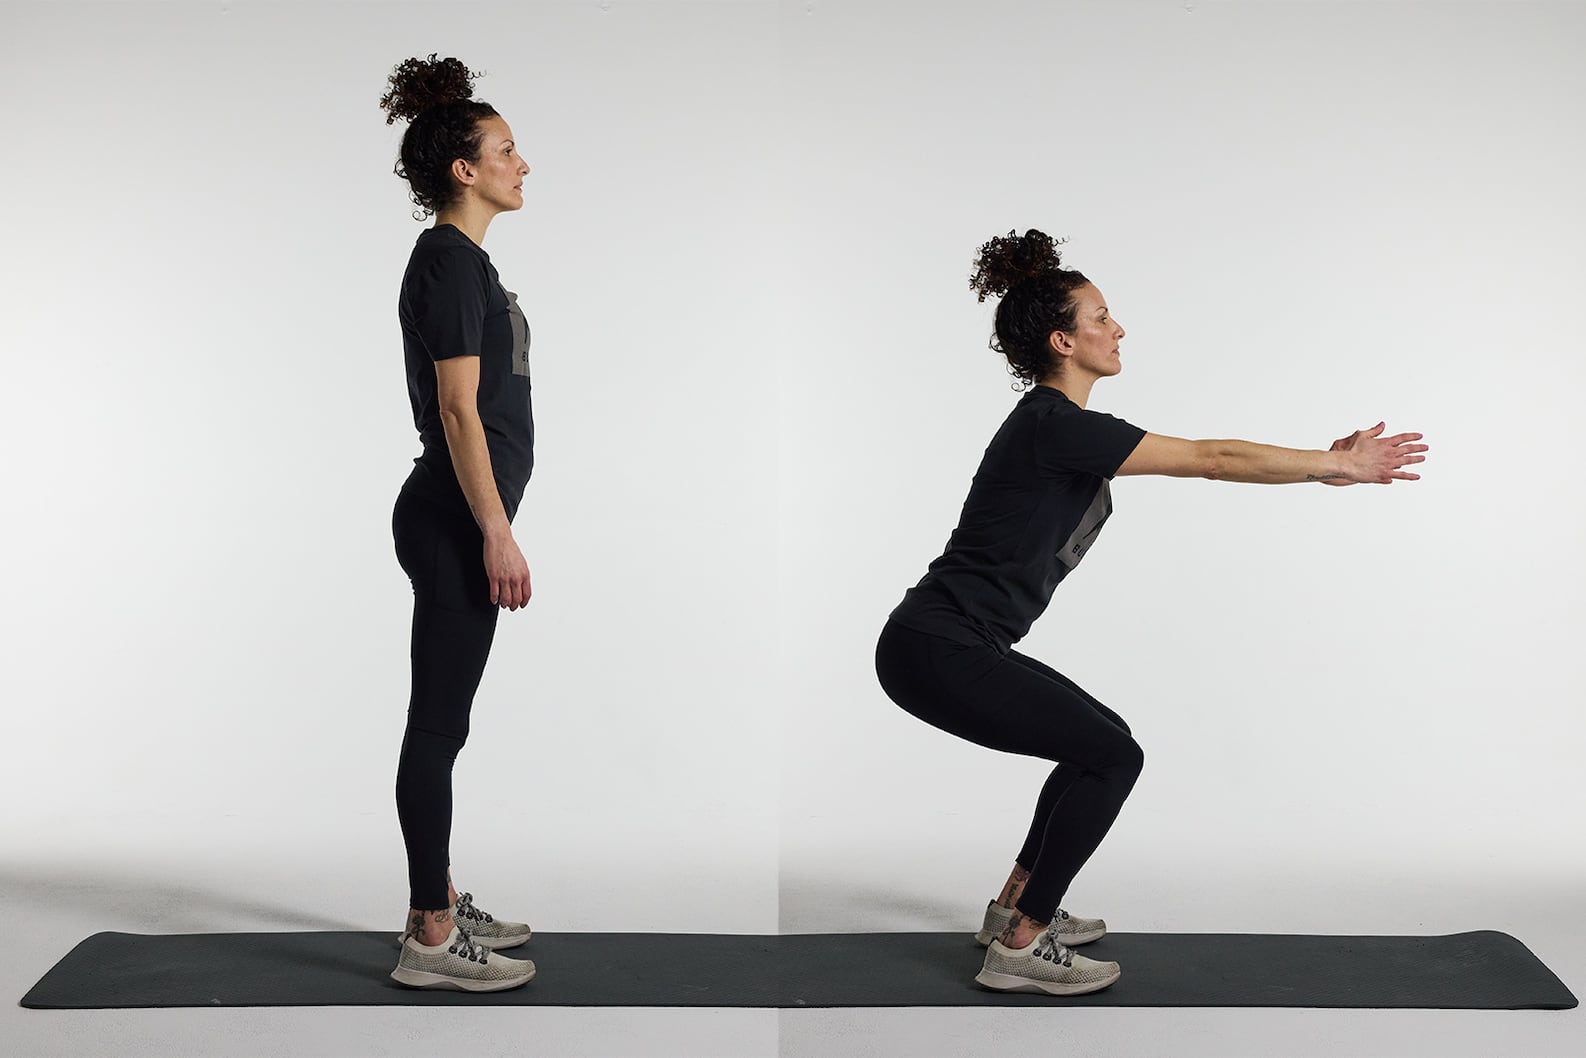 The Snowboarder's Workout: 13 Exercises to Build Strength